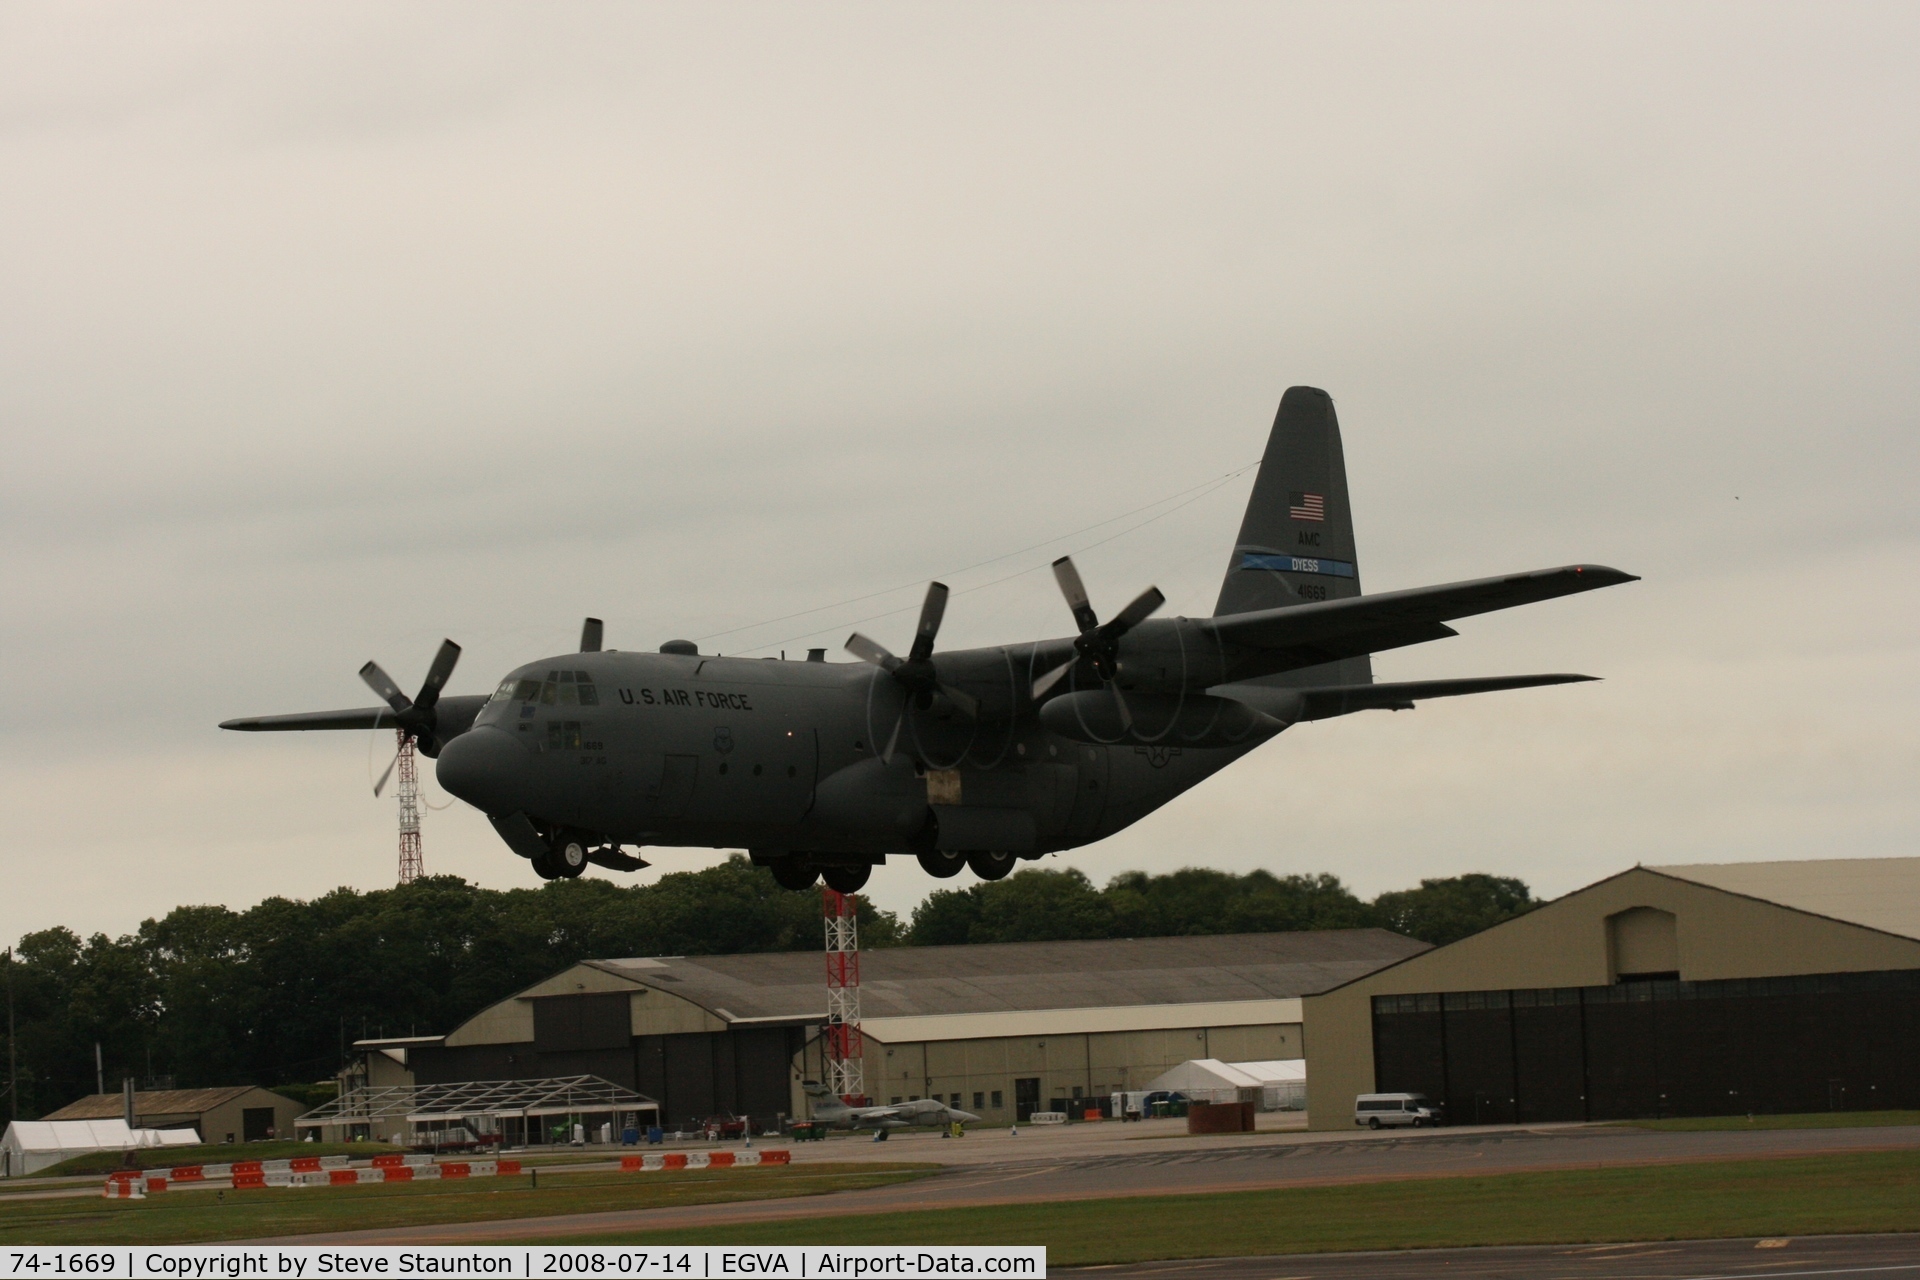 74-1669, 1974 Lockheed C-130H Hercules C/N 382-4617, Taken at the Royal International Air Tattoo 2008 during arrivals and departures (show days cancelled due to bad weather)